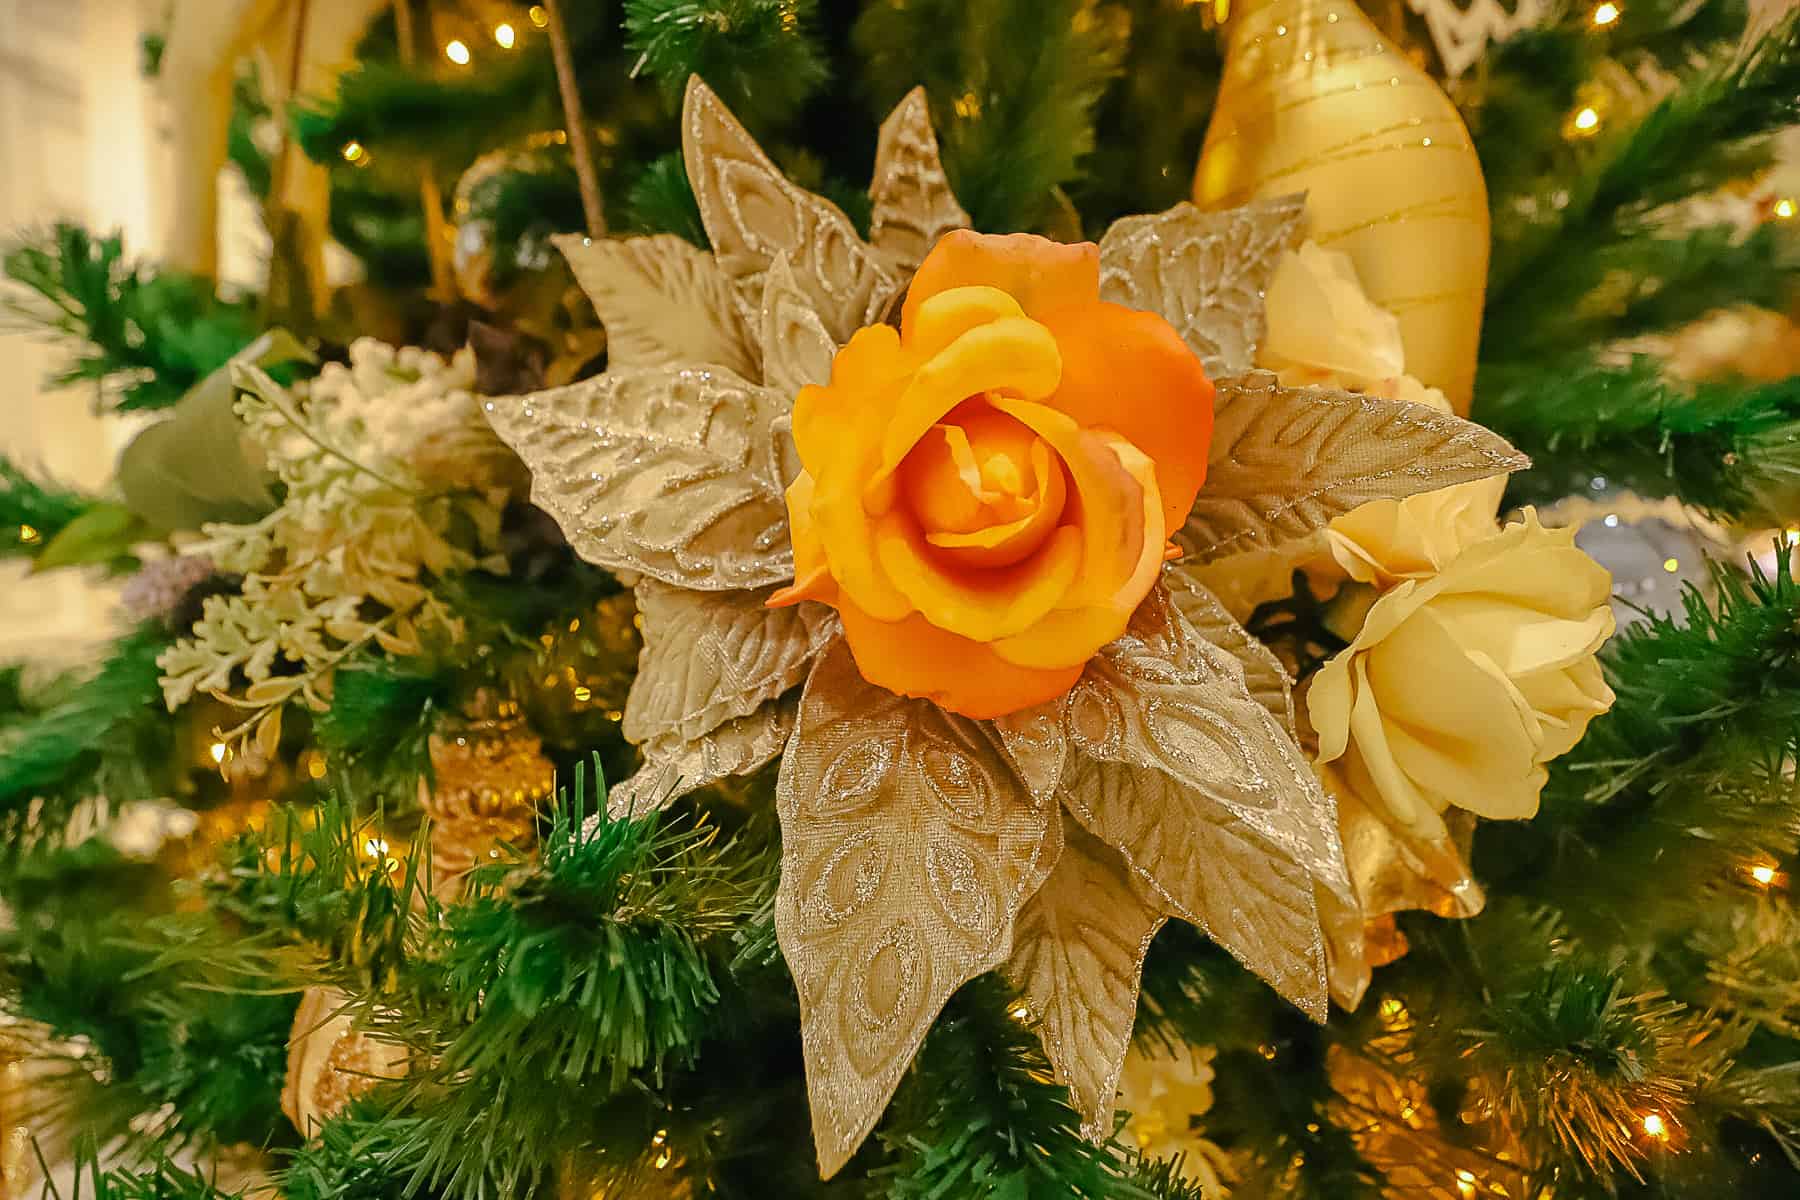 A peach rose placed in the Christmas tree. 